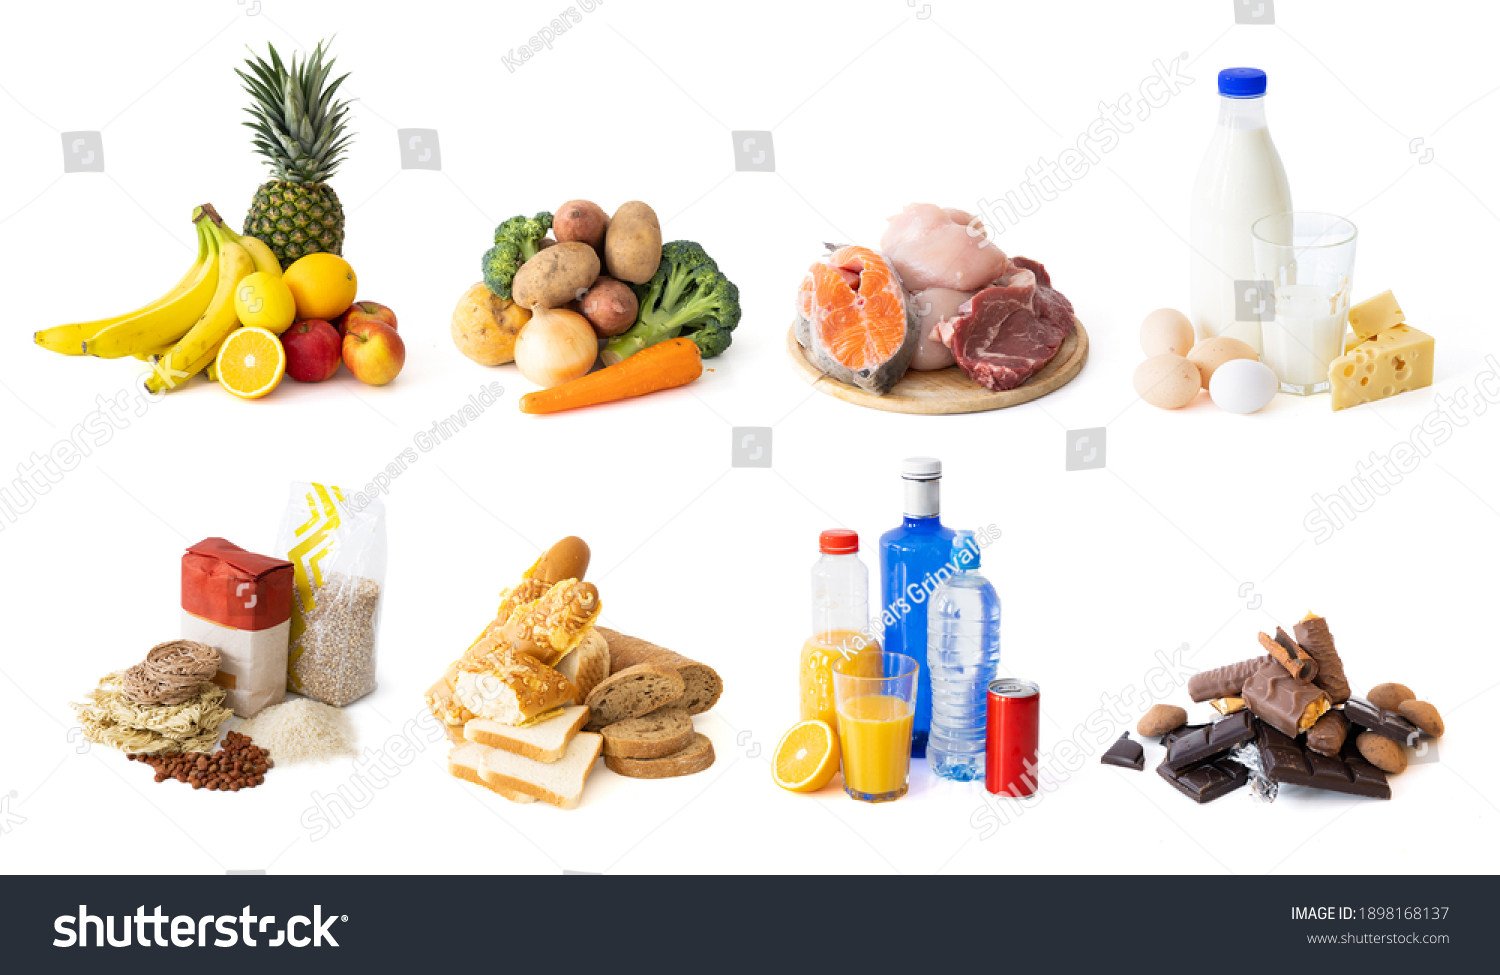 Different food and groceries items grouped by categories, isolated on white background #1898168137